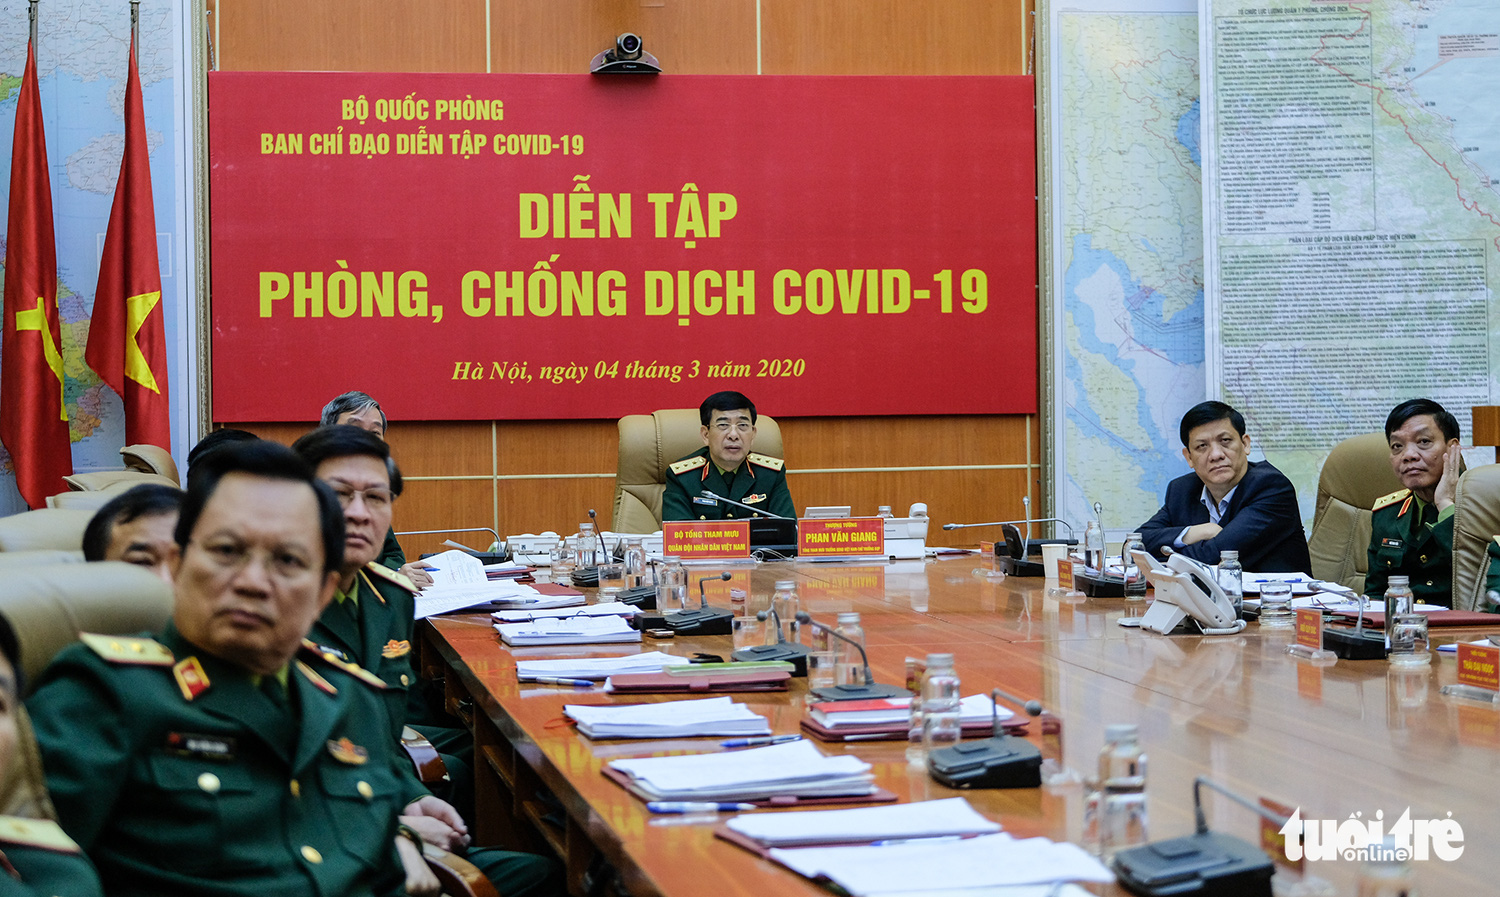 Colonel General Phan Van Giang, deputy defense minister and chief of staff of the Vietnam People’s Army, chairs an exercise for COVID-19 prevention in Hanoi, March 4, 2020. Photo: Nam Tran / Tuoi Tre